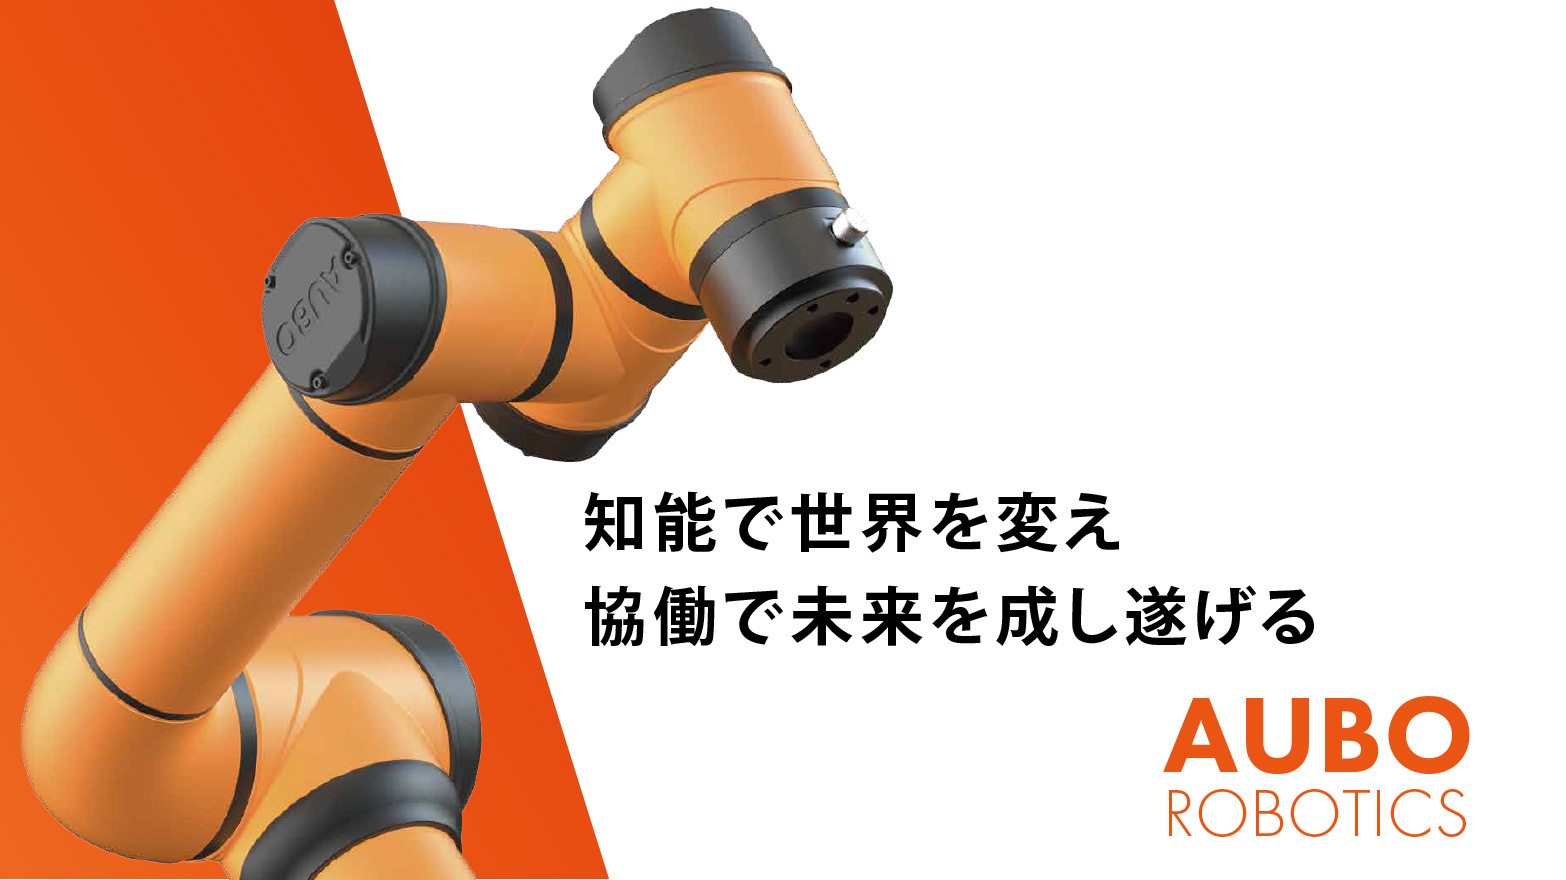 aubo協働ロボット